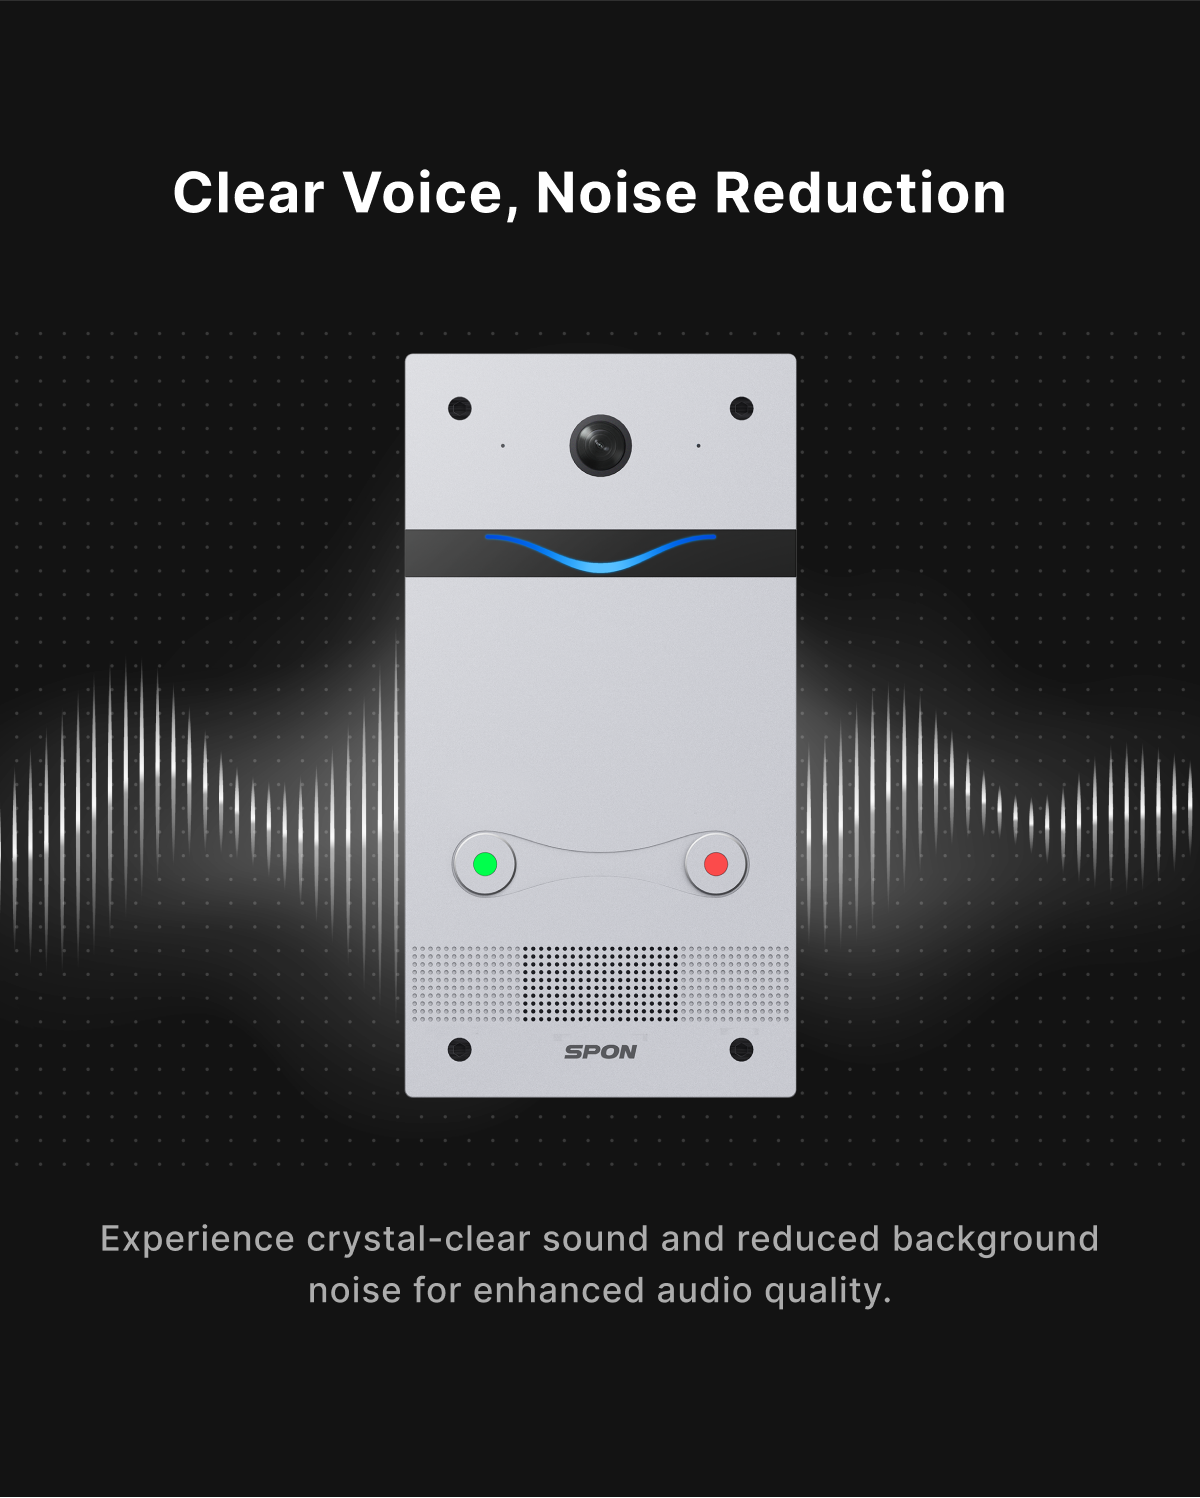 Centralized Management Independent Control Hands free Indoor Video Intercom for Intercom System, Experience crystal-clear sound and reduced background noise for enhanced audio quality